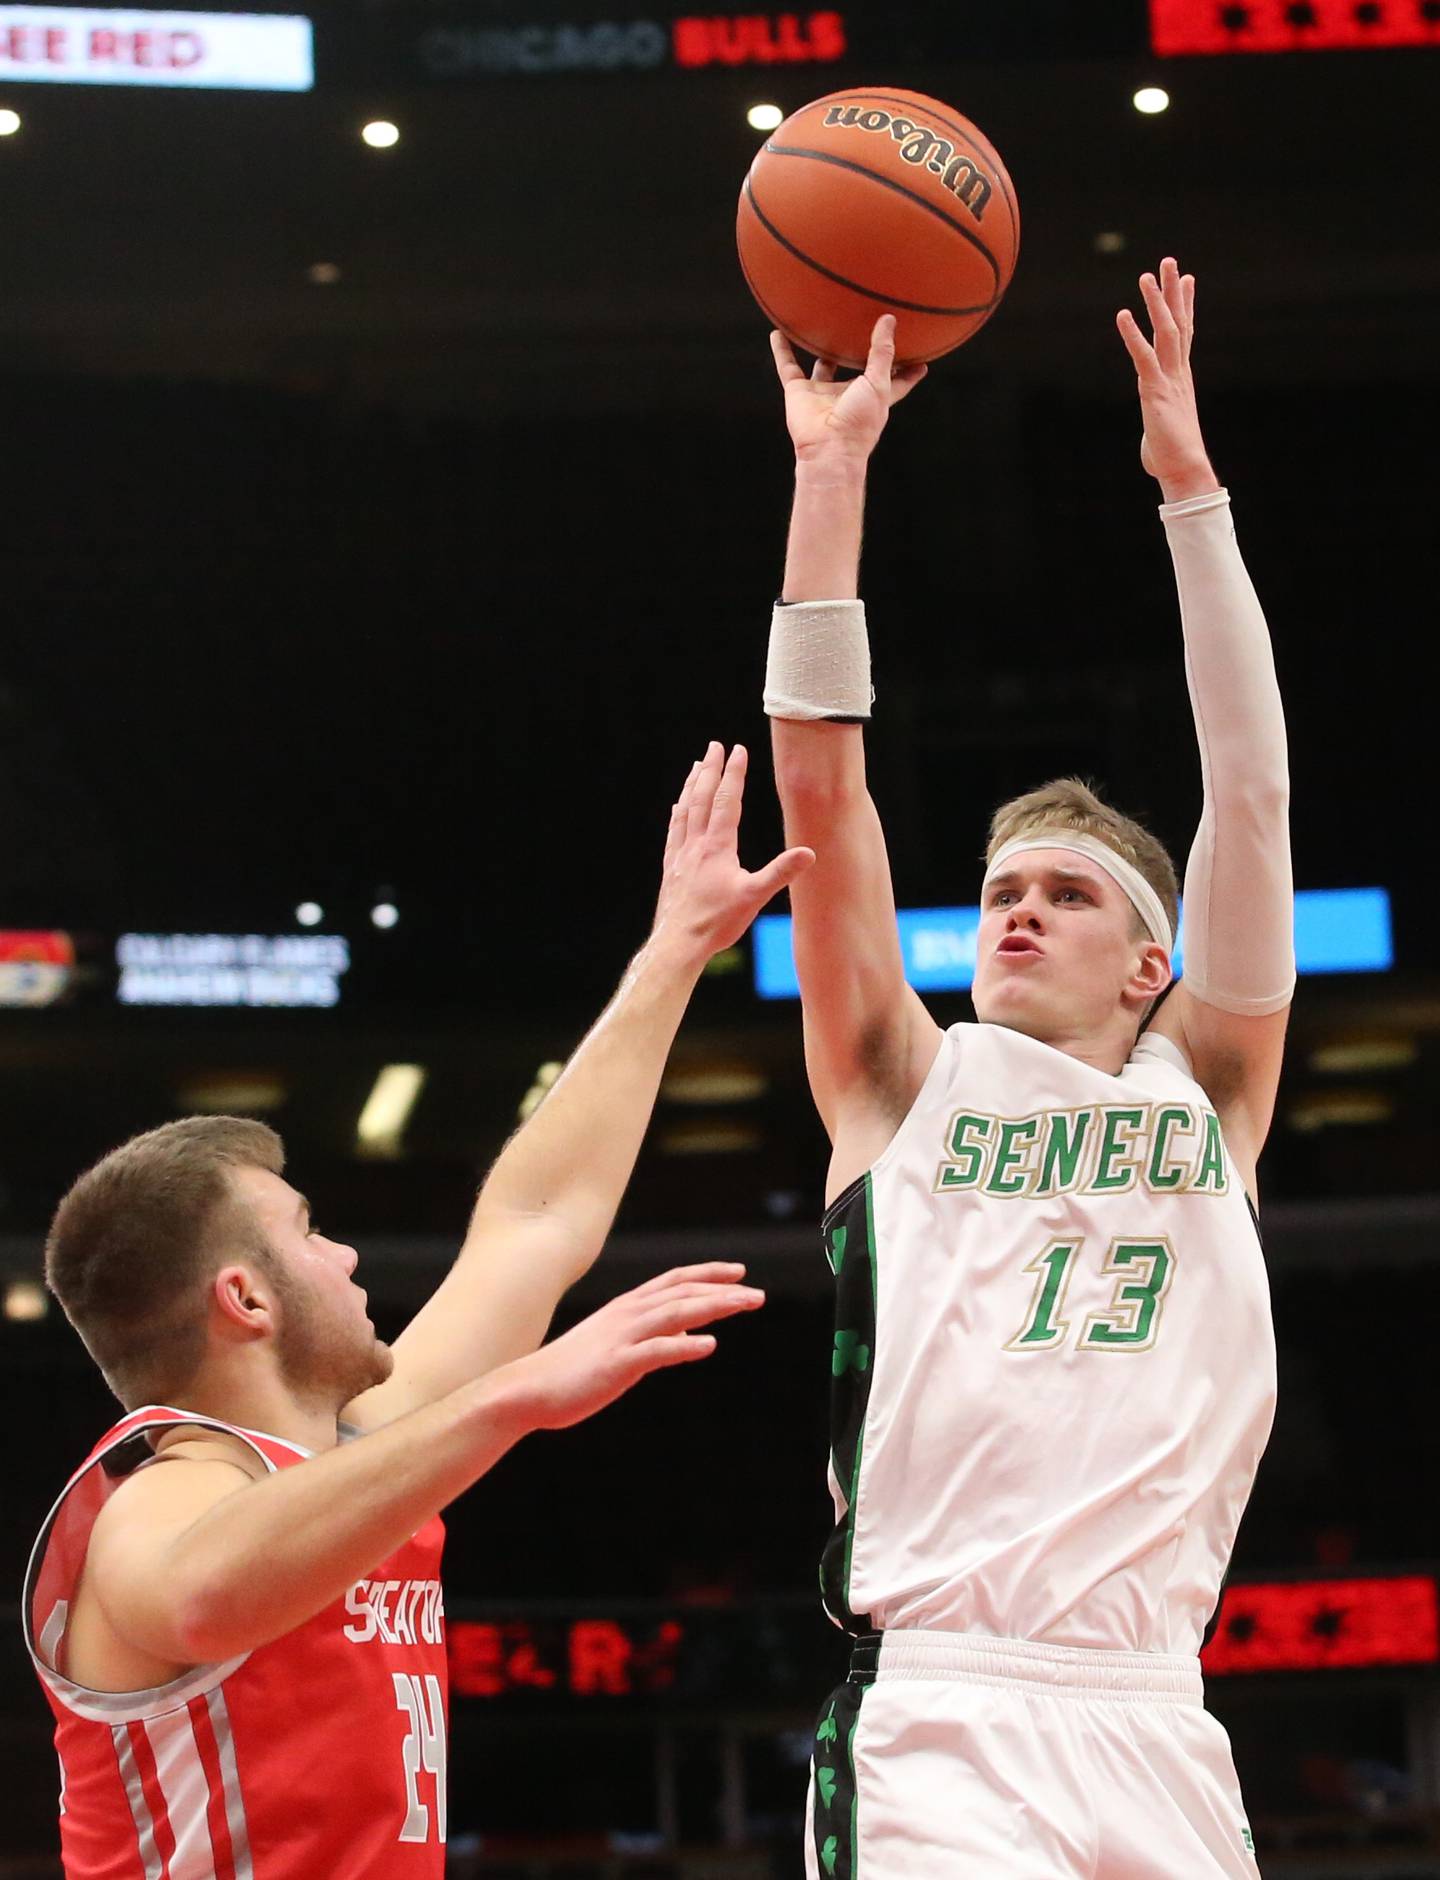 Seneca's Paxton Giertz shoots a jump shot over Streator's Landon Muntz during a game on Tuesday, Dec. 21, 2023 at the United Center in Chicago.